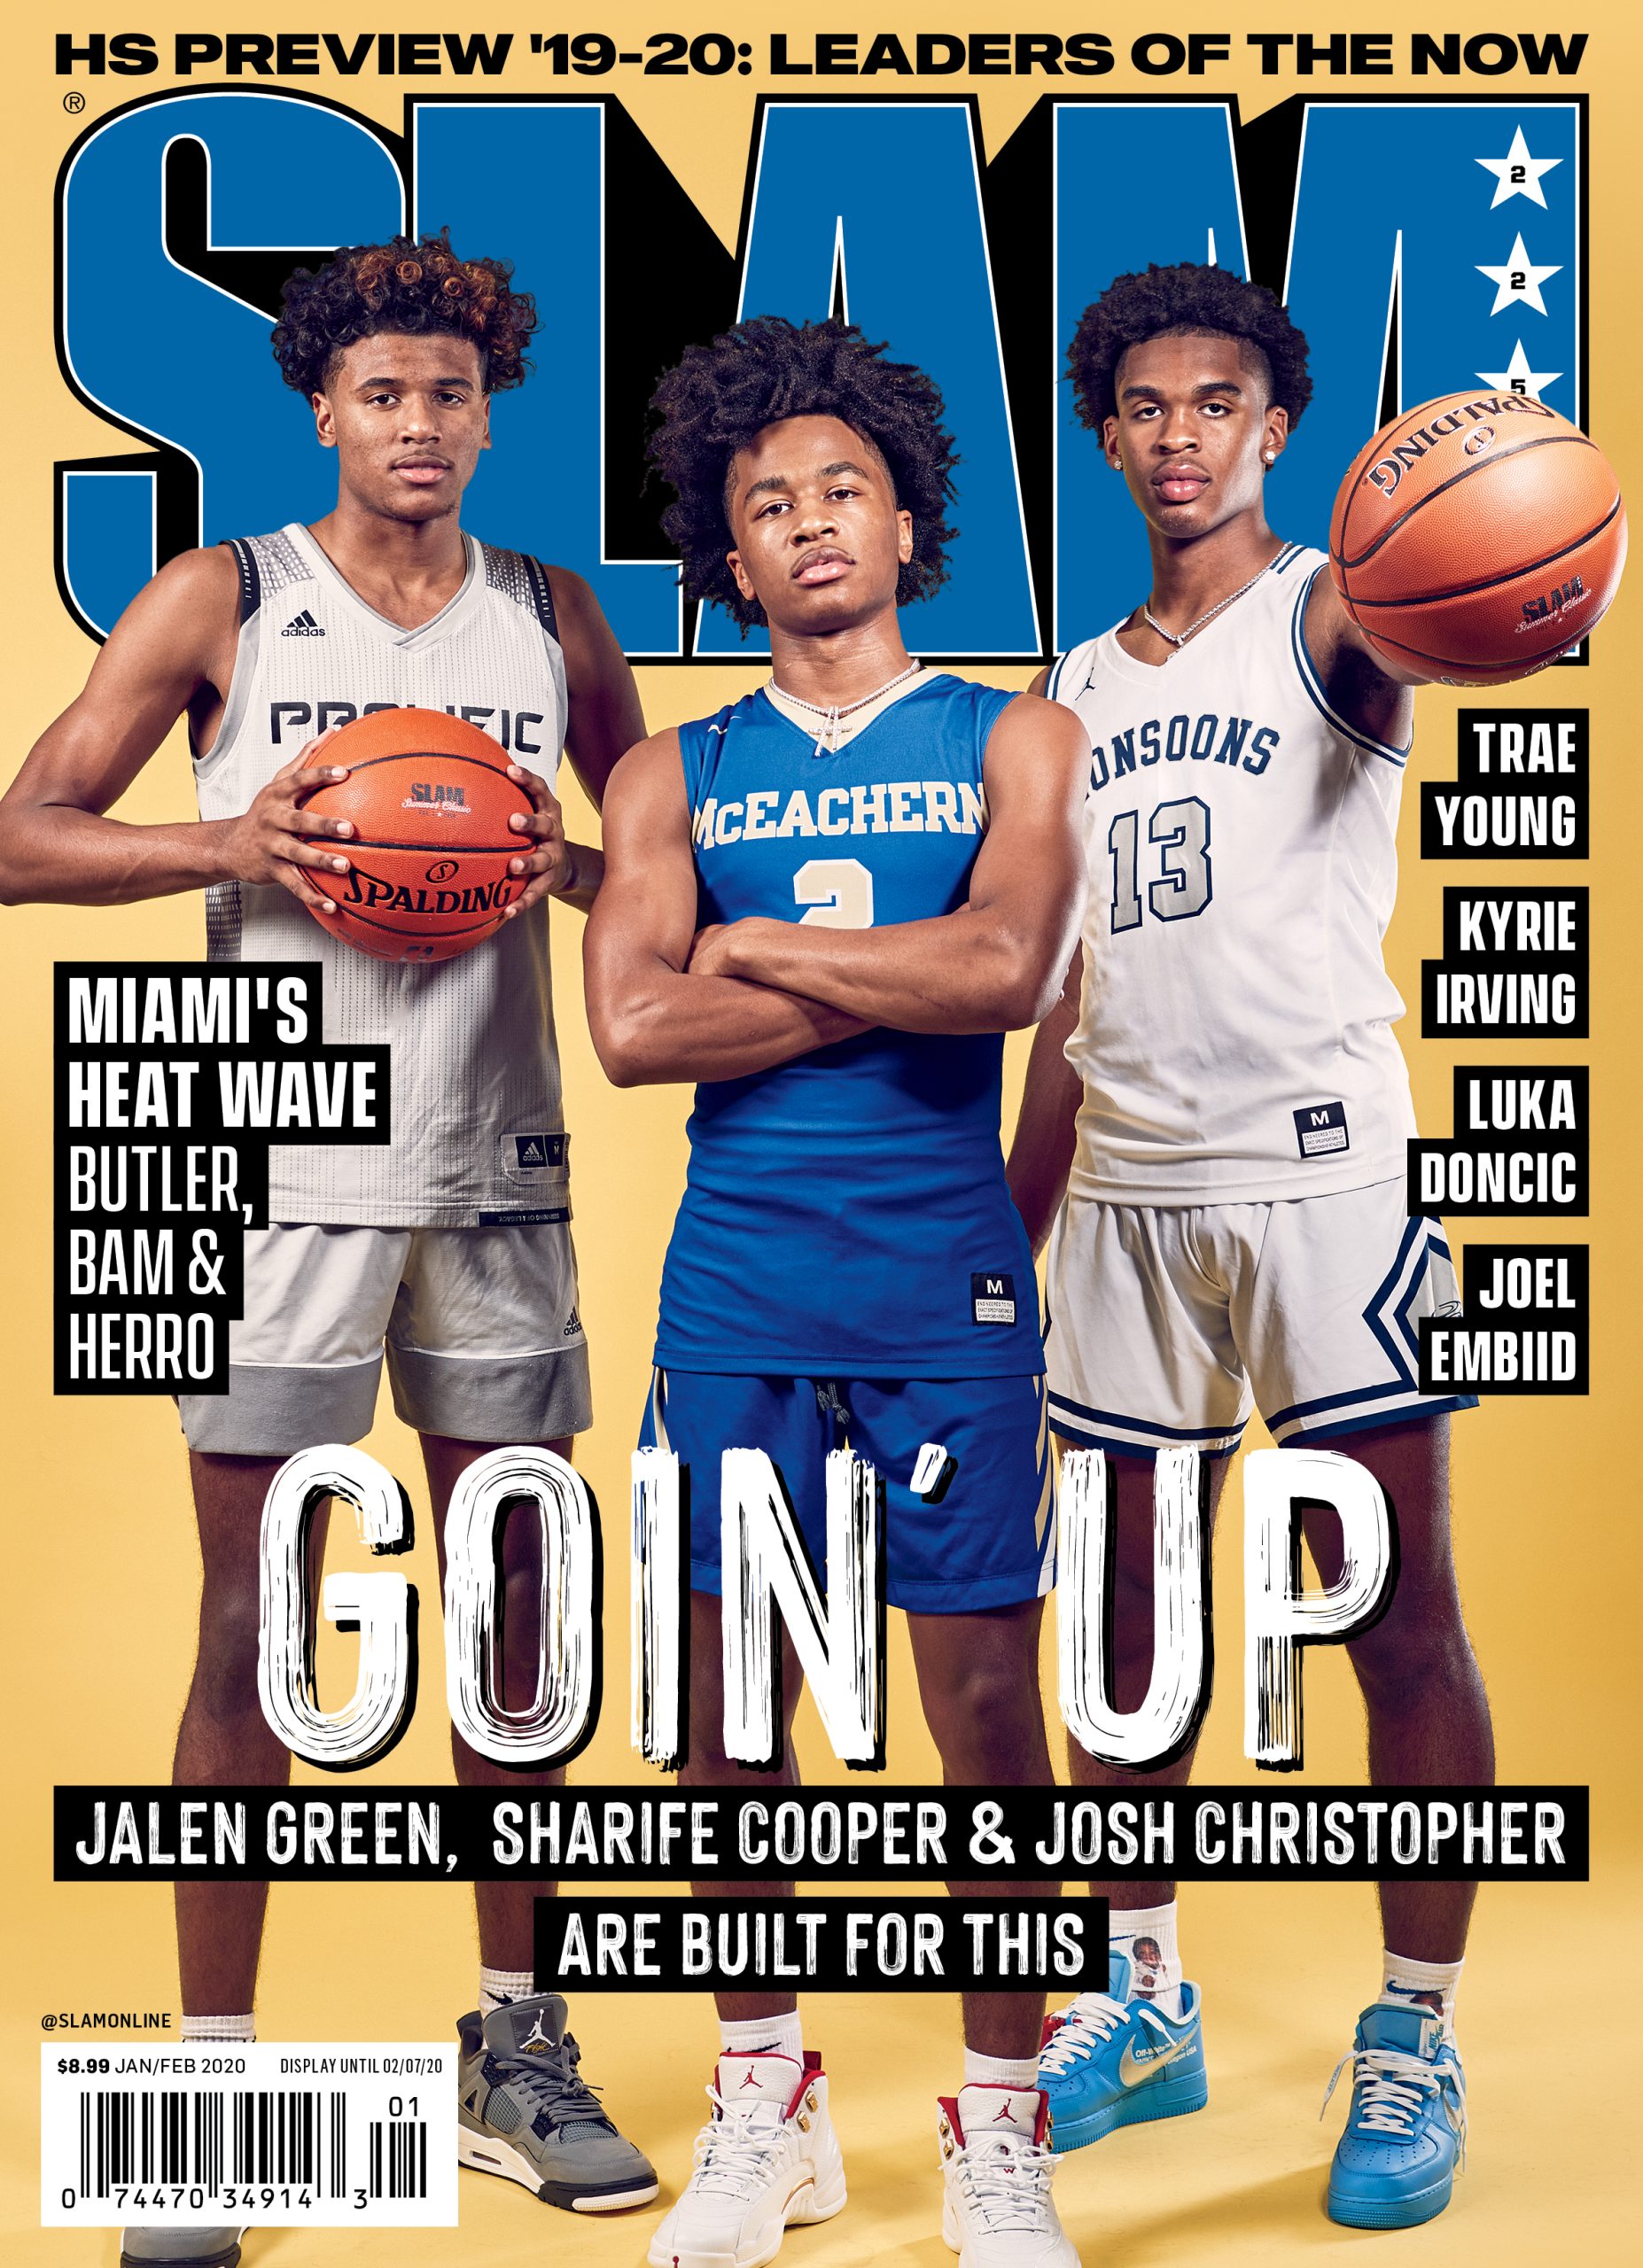 THE 30 PLAYERS WHO DEFINED SLAM’S 30 YEARS: Josh Christopher, Sharife Cooper and Jalen Green